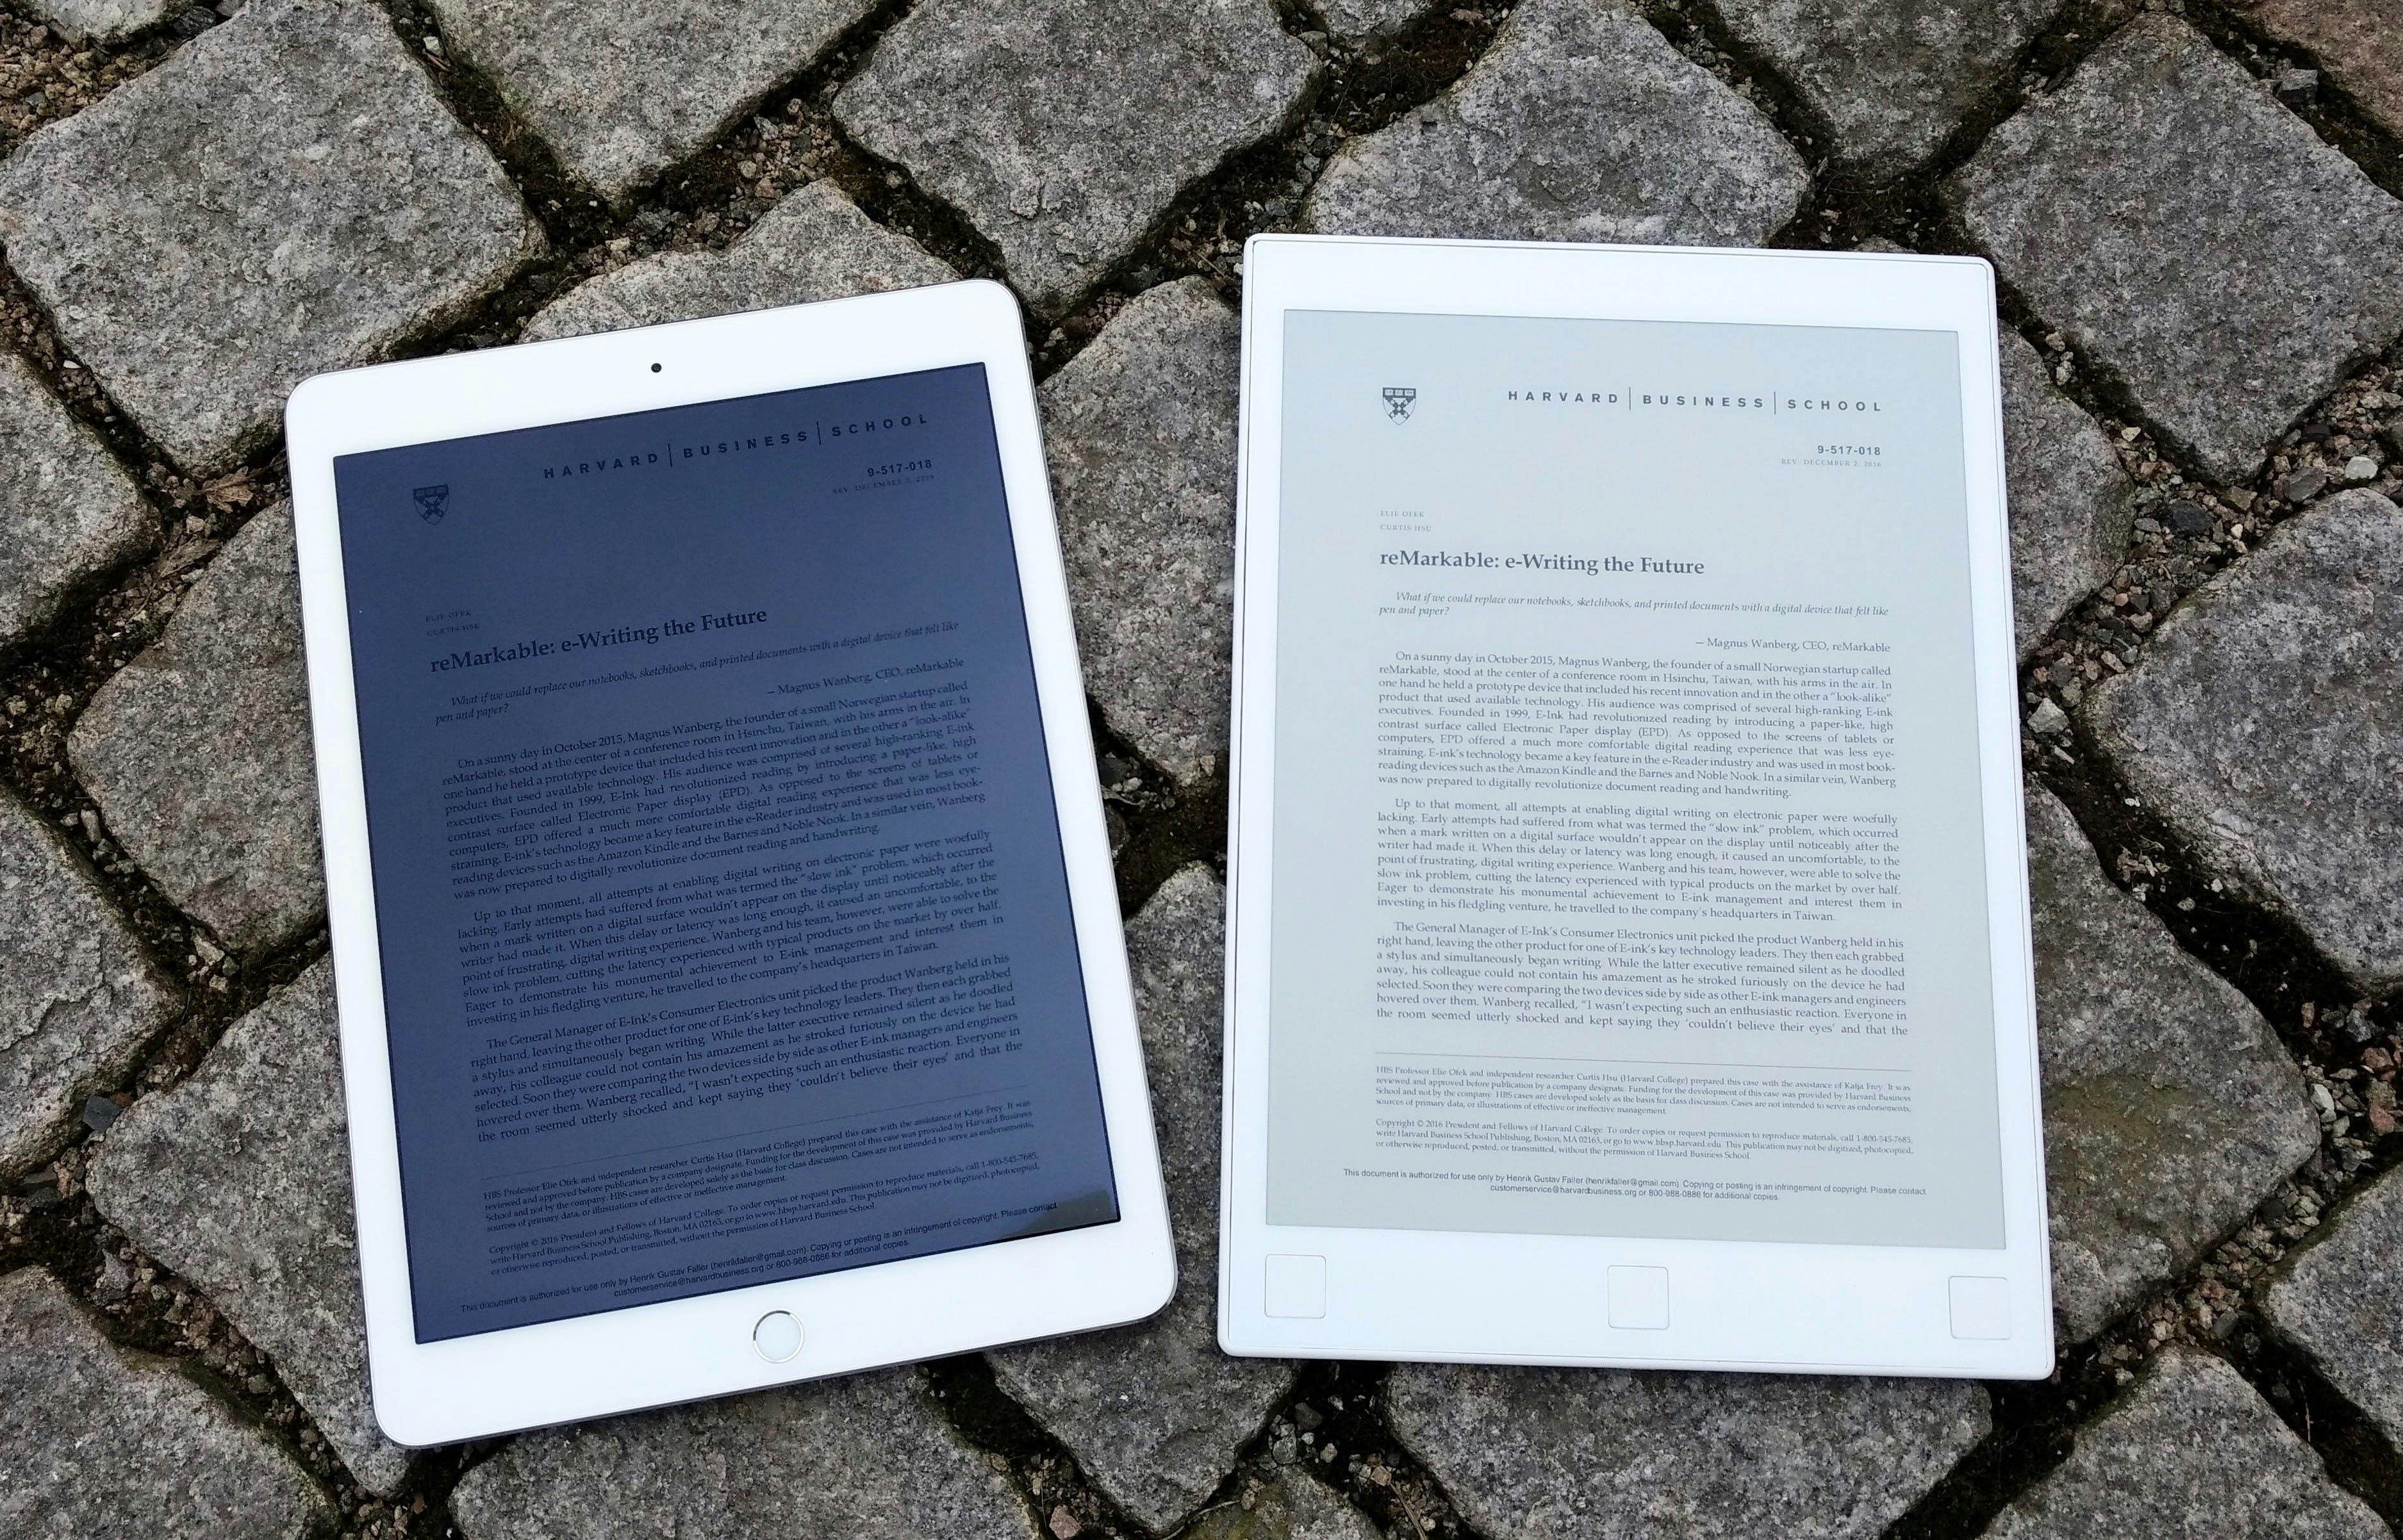 Comparison between iPad and reMarkable